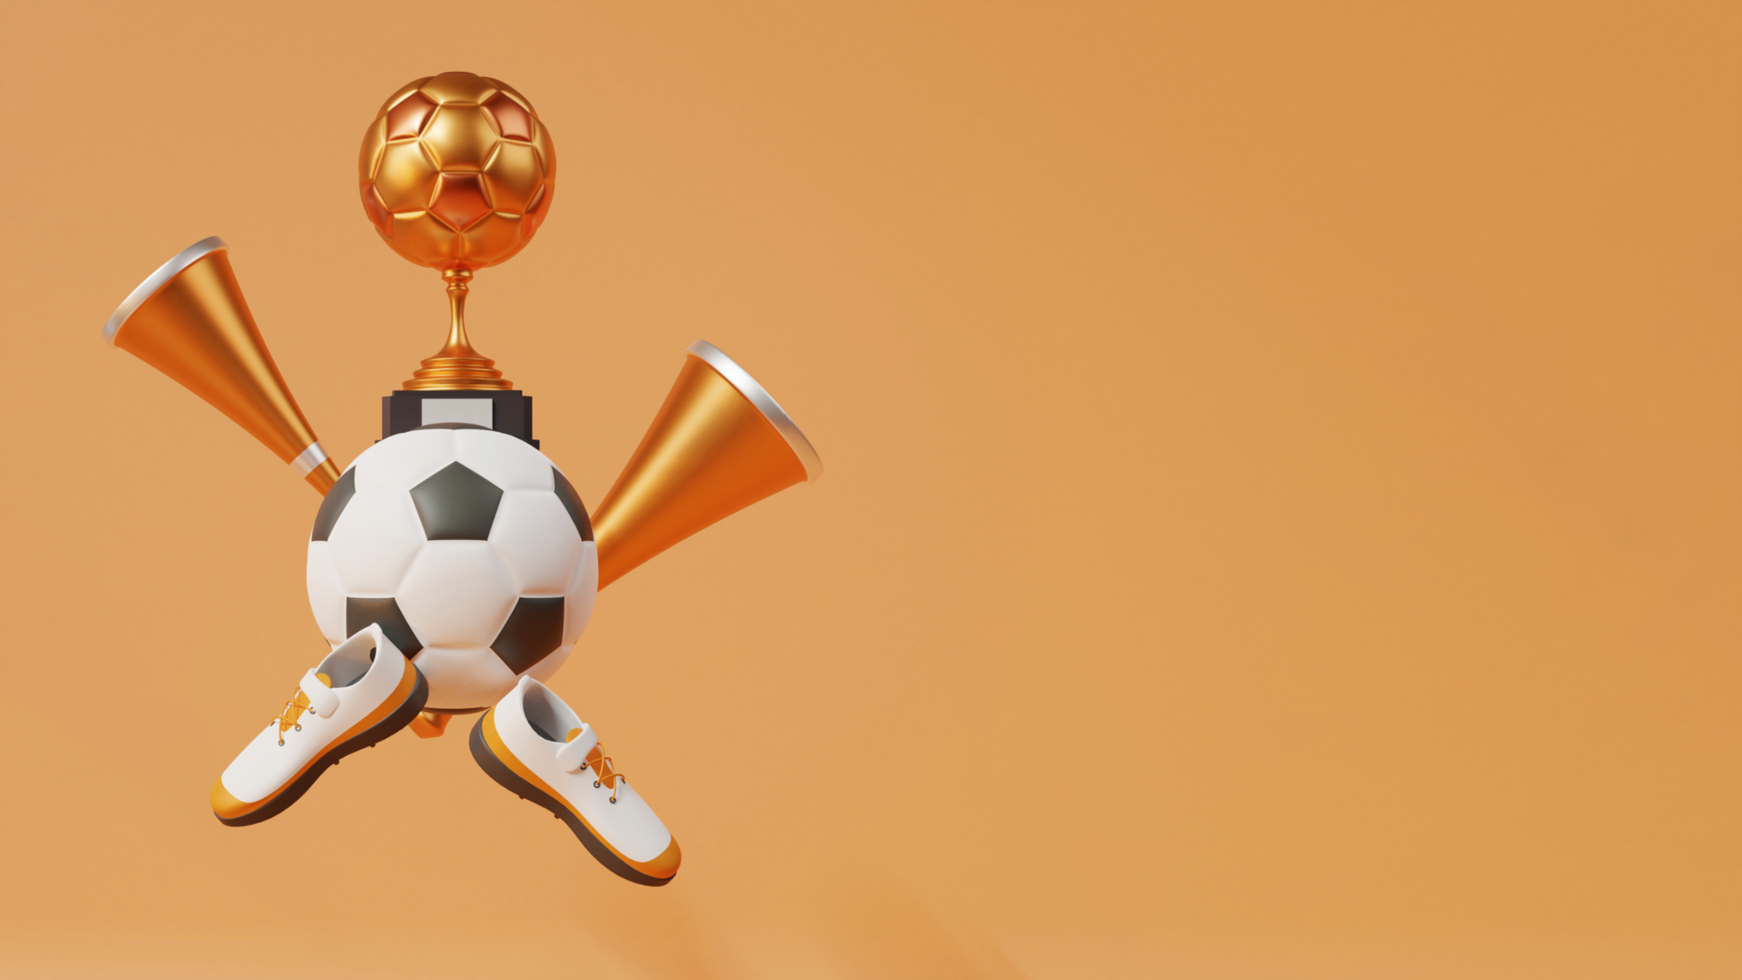 3D Bronze Soccer Trophy Cup With Football, Vuvuzela Horns, Shoes And Copy Space On Brown Background. psd